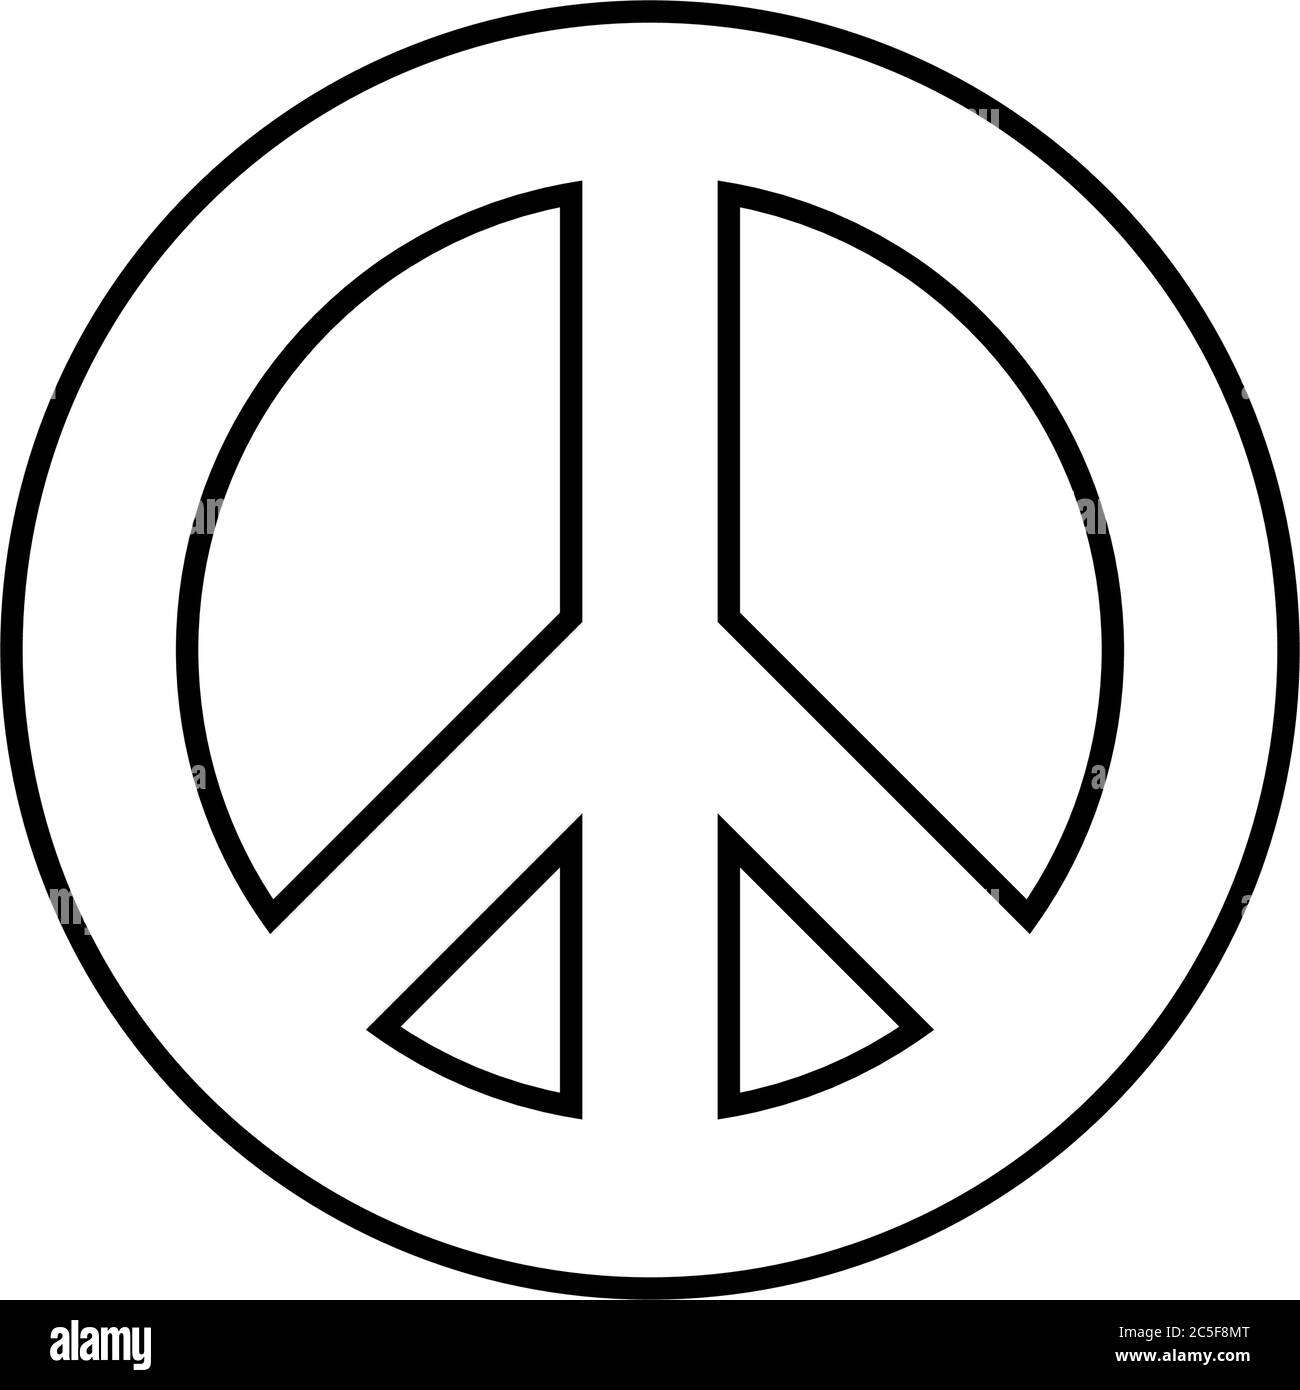 Peace and love symbol vector antiwar pacifism icon hippie culture sign illustration Stock Vector